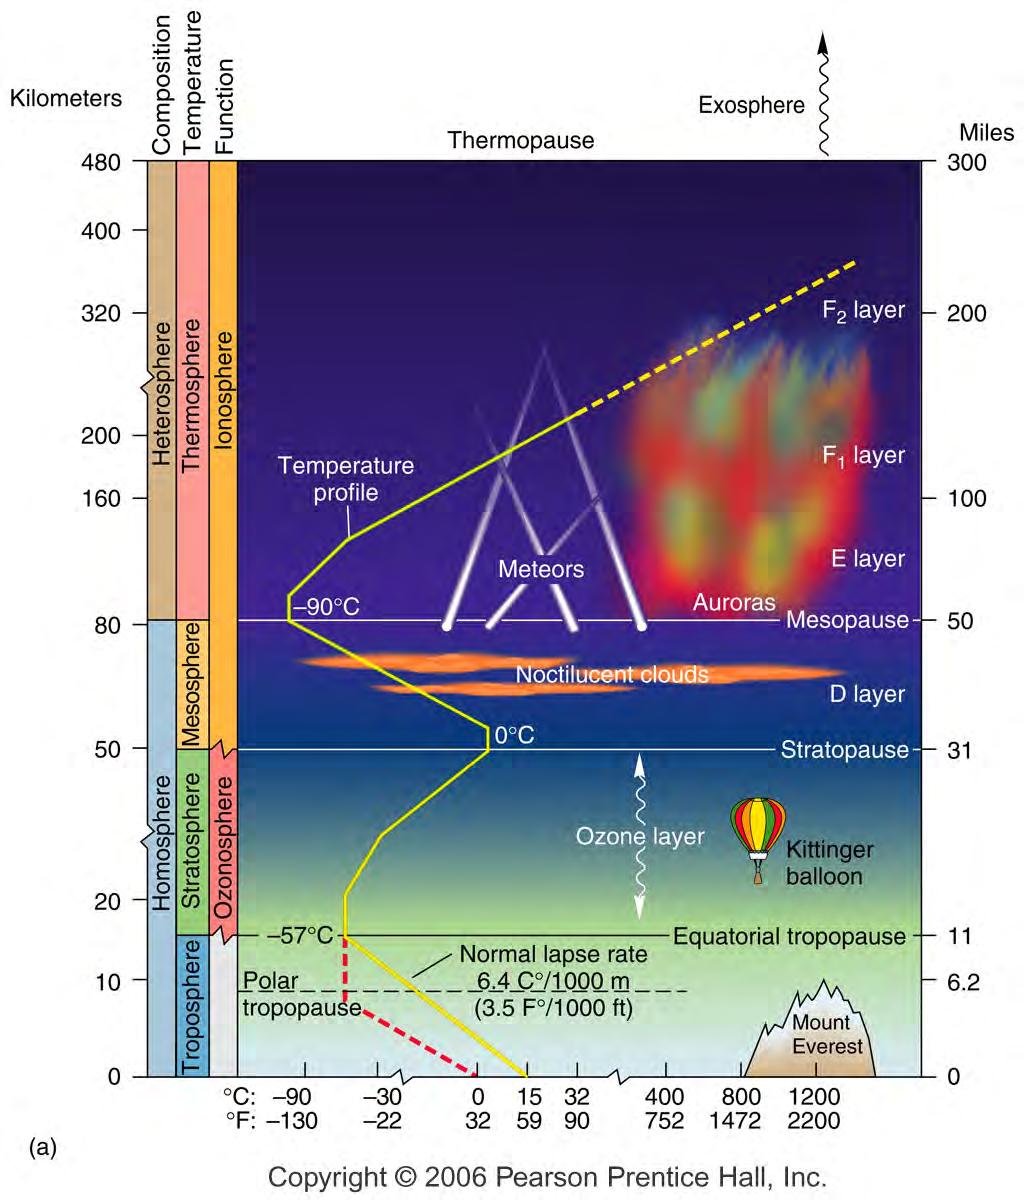 Profile of Atmosphere Layers based on: